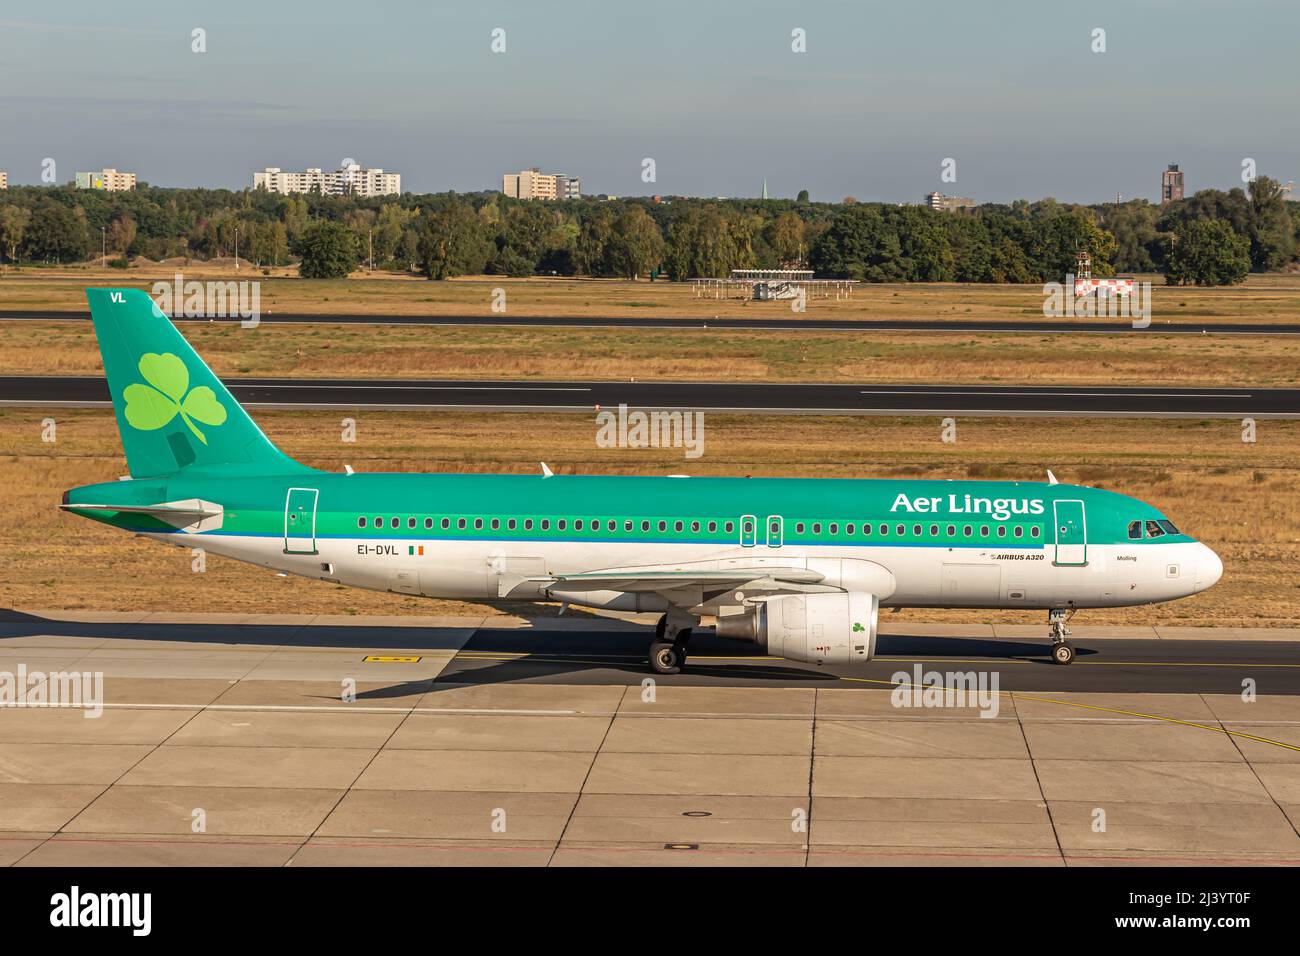 Berlin, Germany - September 15, 2018: Aer Lingus Airbus A320-214 aircraft taxiing at Tegel Airport Stock Photo